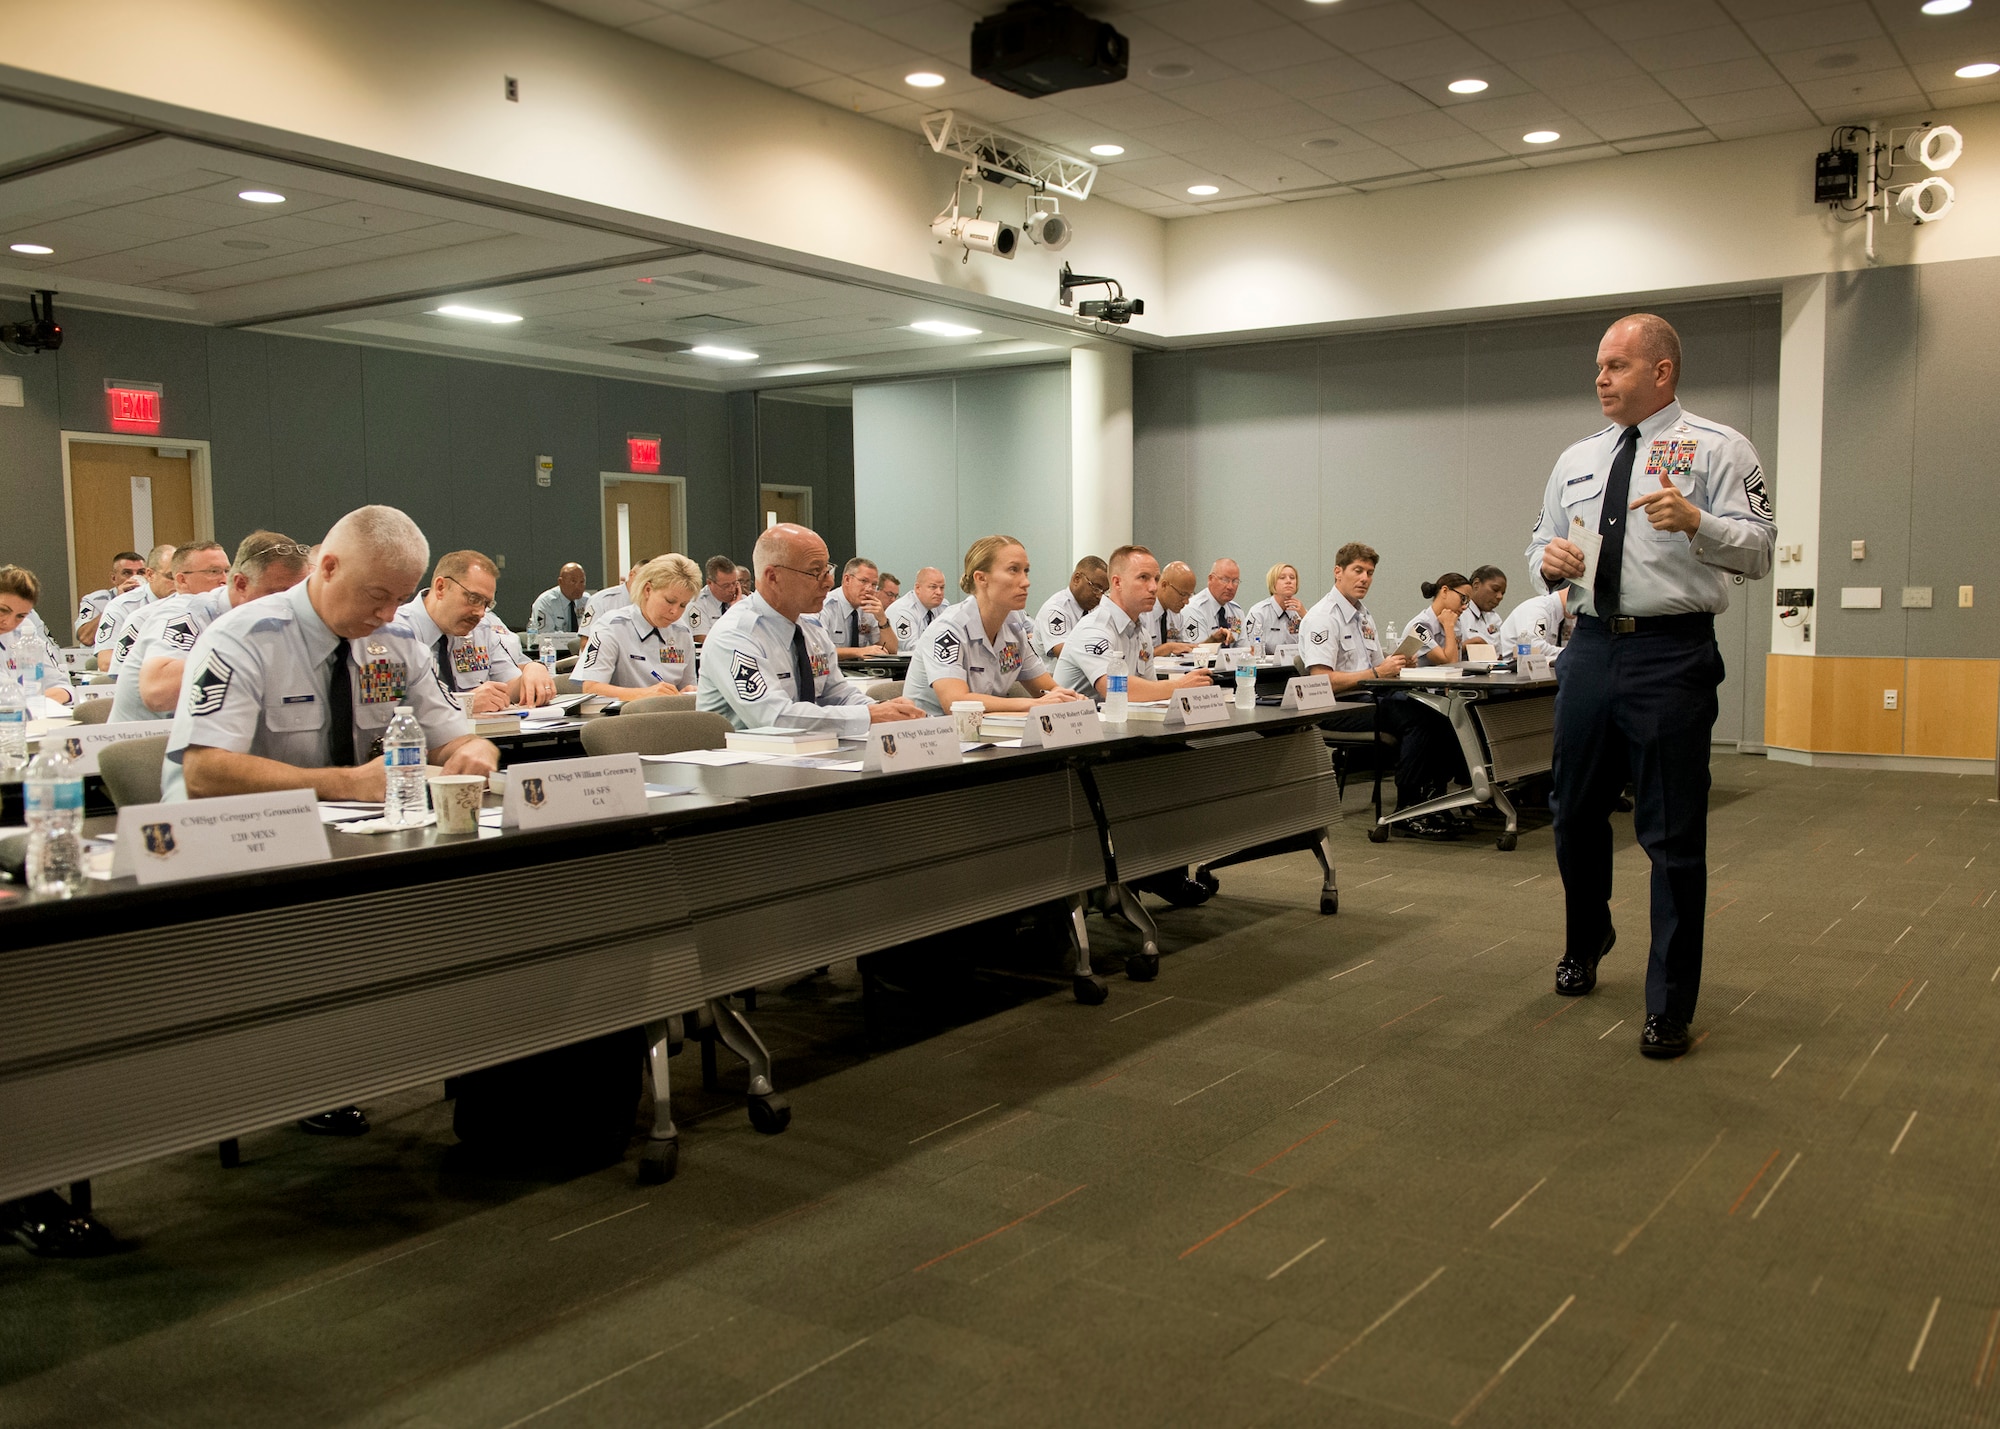 The Chief Master Sergeant of the Air National Guard, James W. Hotaling, addresses recently-promoted chief master sergeants during the Chief's Executive Course at the Air National Guard Readiness Center at Joint Base Andrews, Md., Aug. 3, 2015. Hotaling also used the opportunity to introduce the ANG Outstanding Airmen of the Year for 2015. The CEC provides recently promoted Chief Master Sergeants with a broad view of operations at a strategic level. (Air National Guard photo by Master Sgt. Marvin. R. Preston, Released)